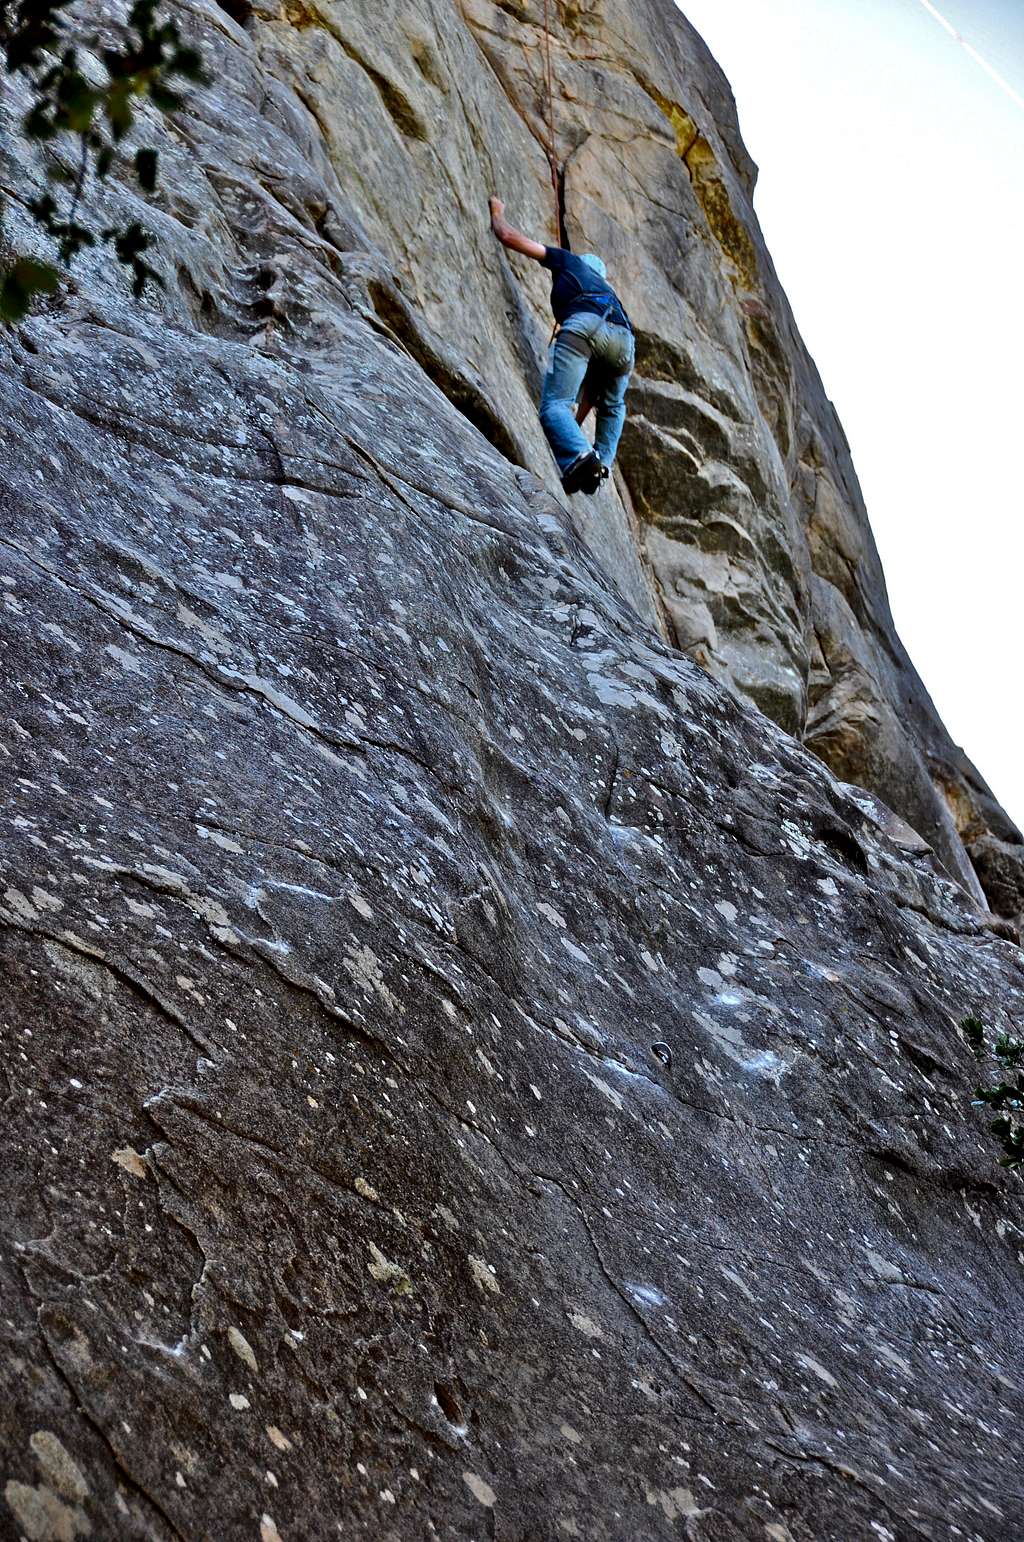 Keith after the lower slab